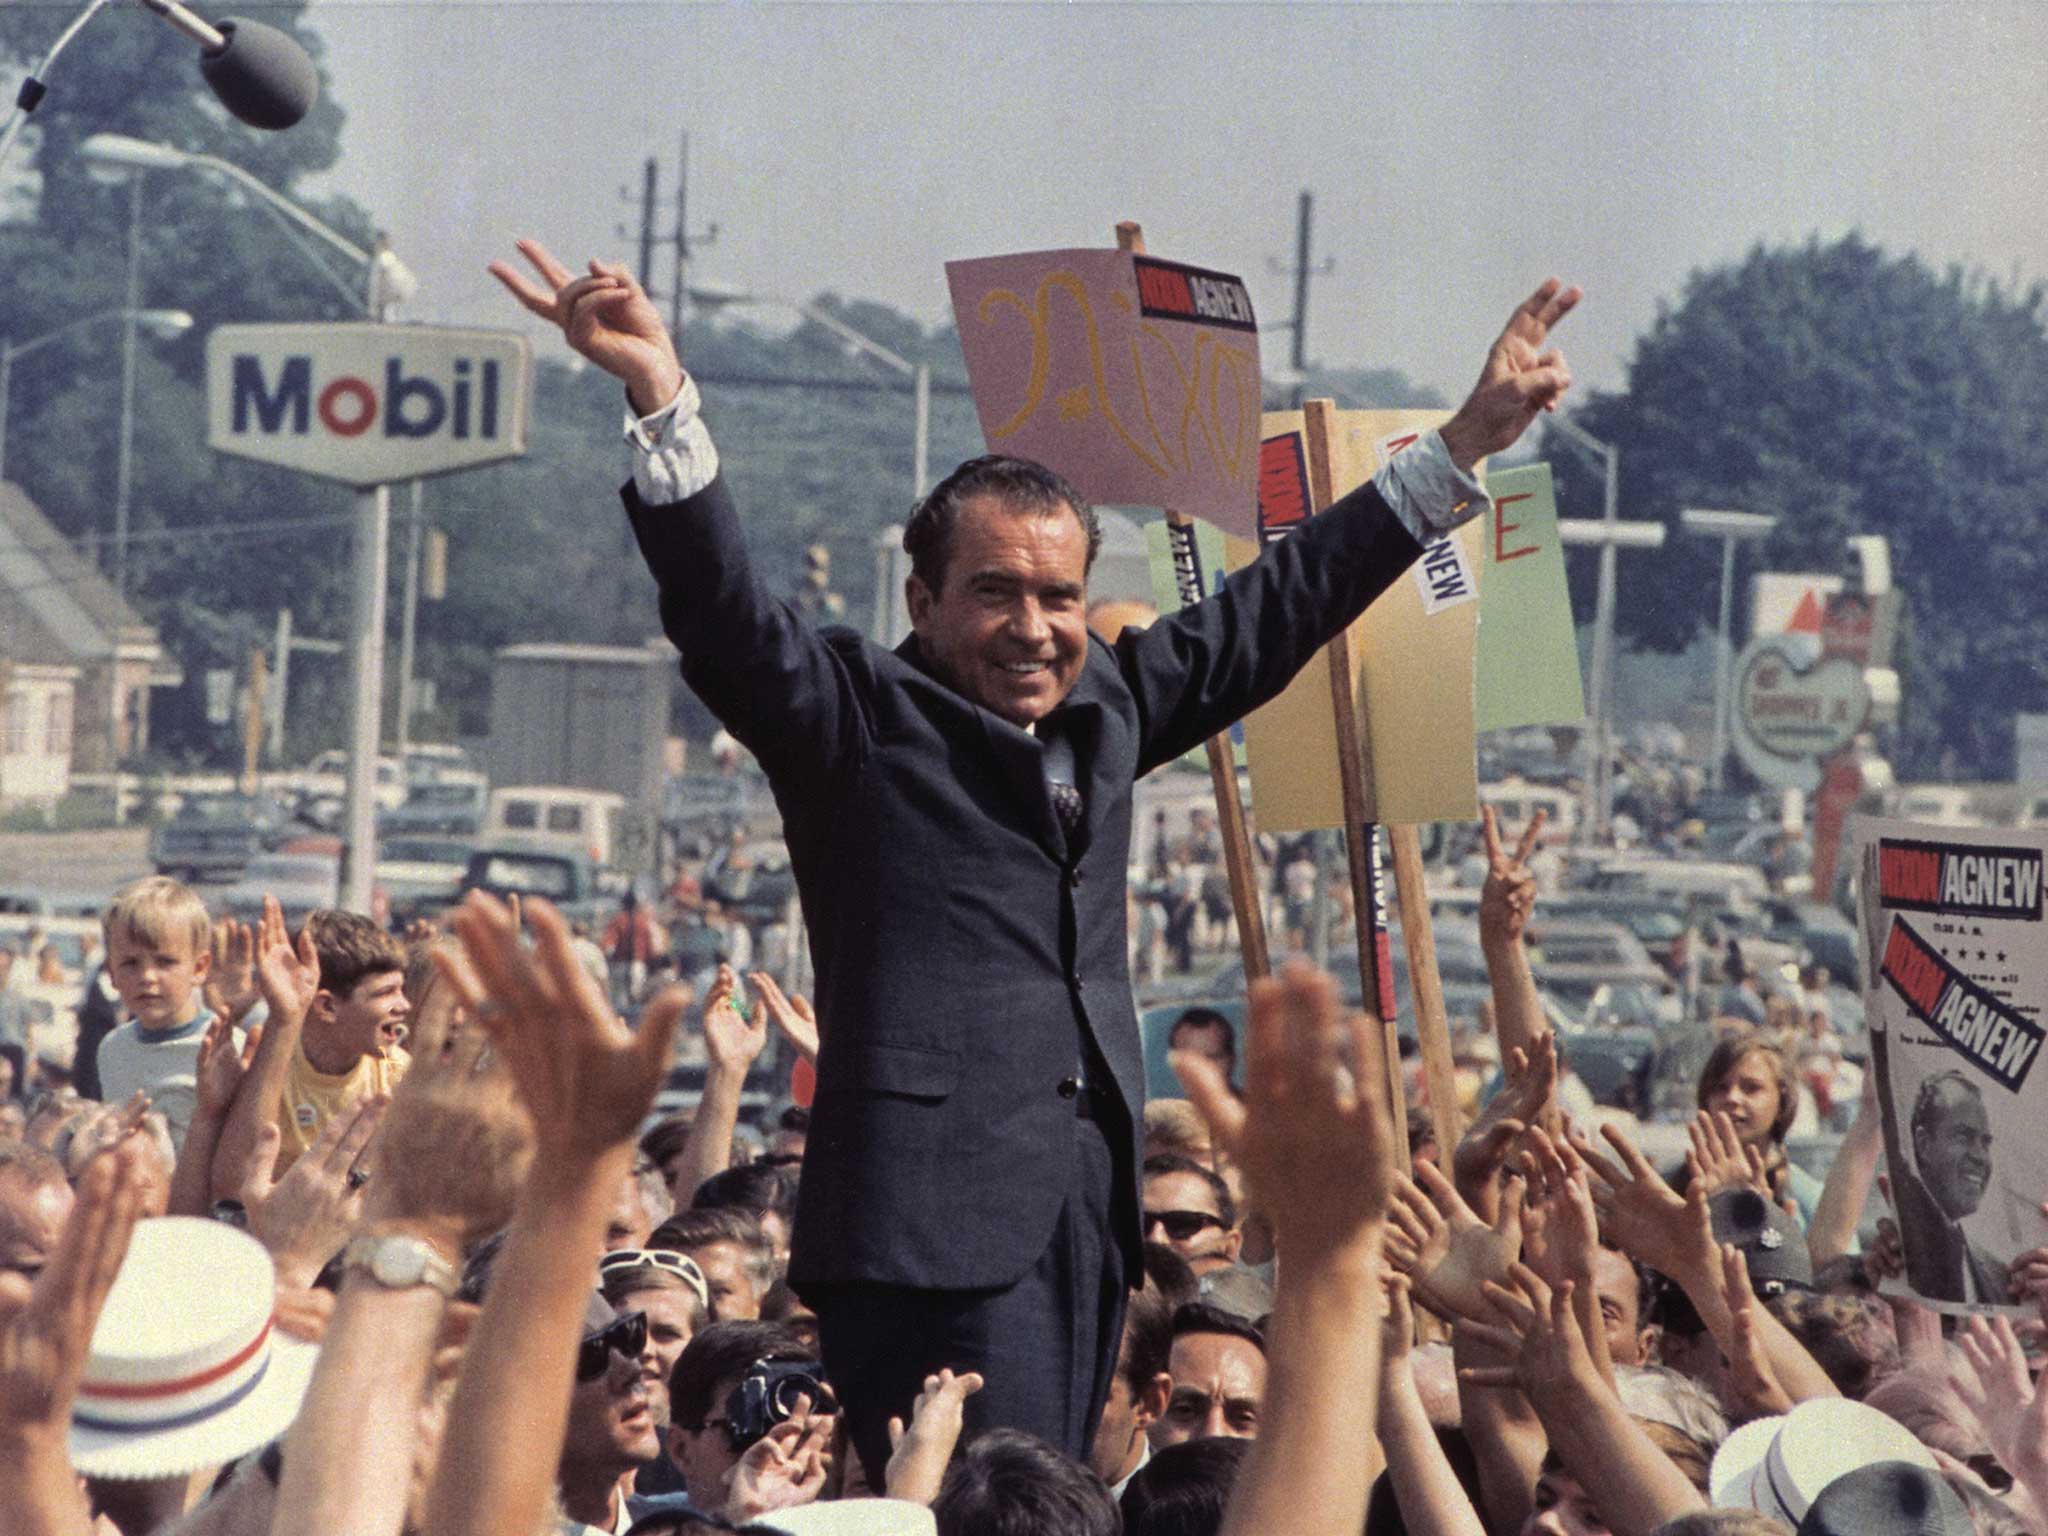 Richard Nixon knew how to win elections - but the tactics he used unraveled with the Watergate scandal